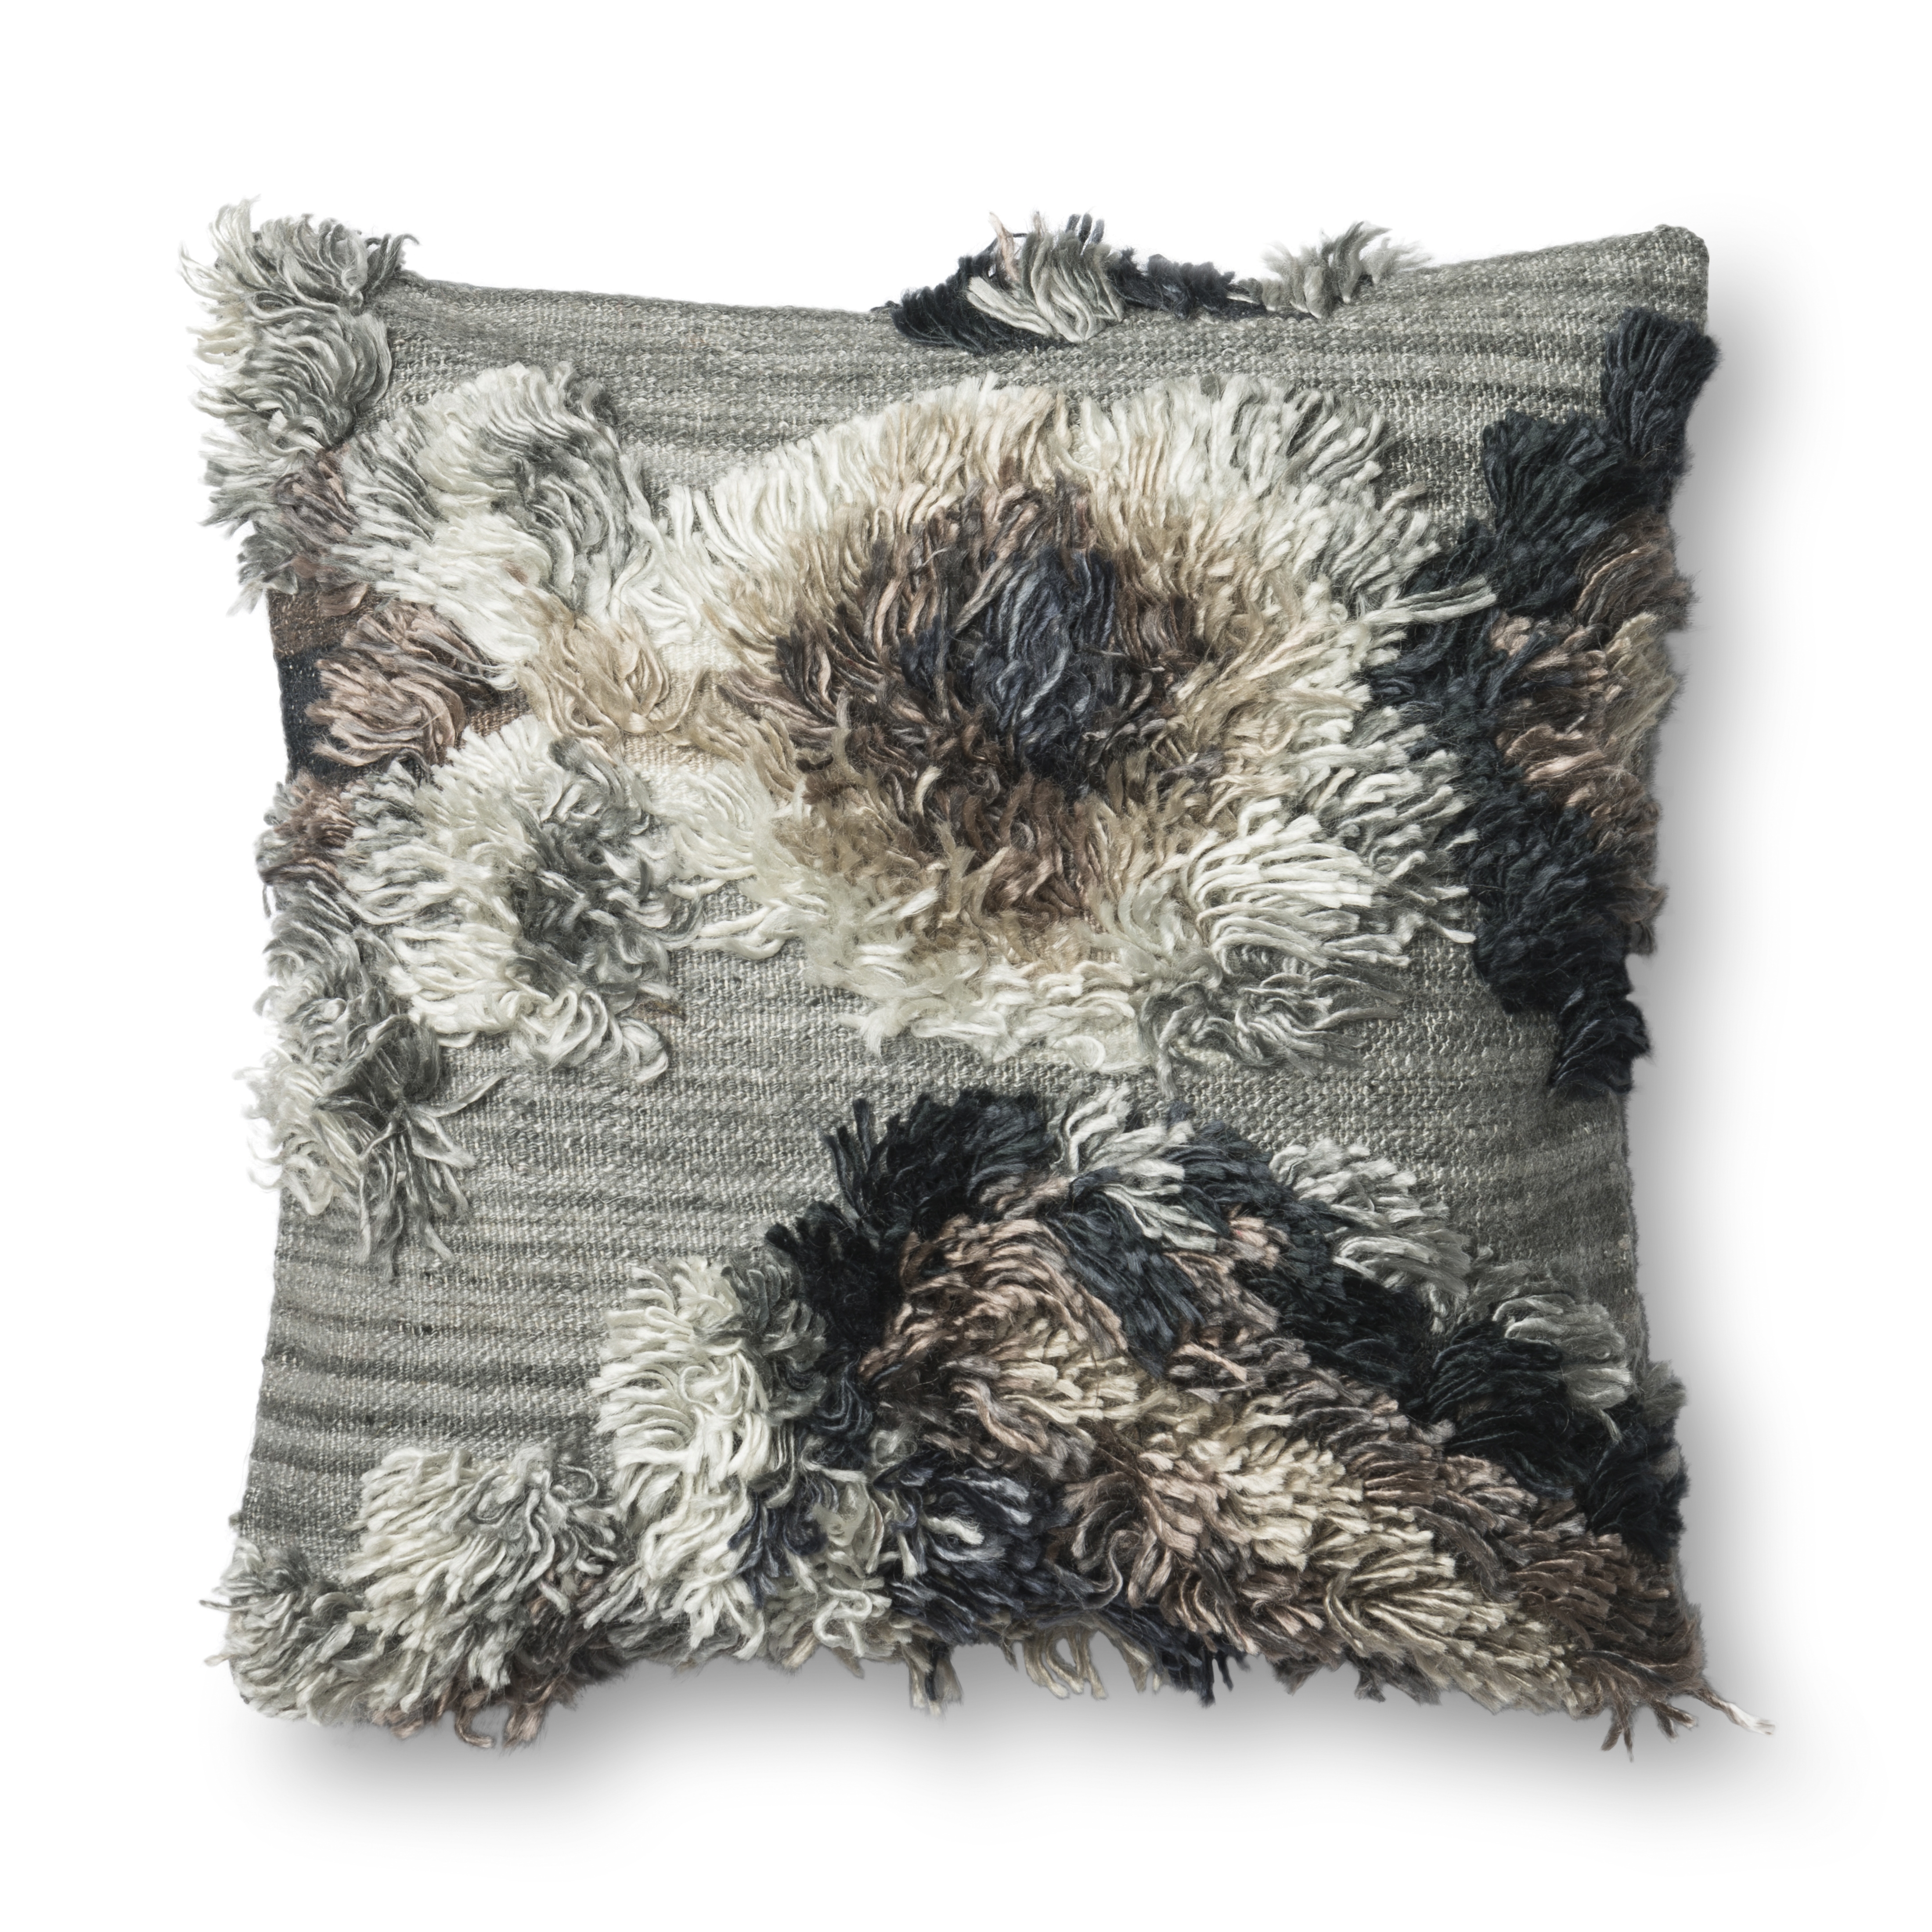 Justina Blakeney x Loloi Pillows P0414 Granite 22" x 22" Cover Only - Image 0